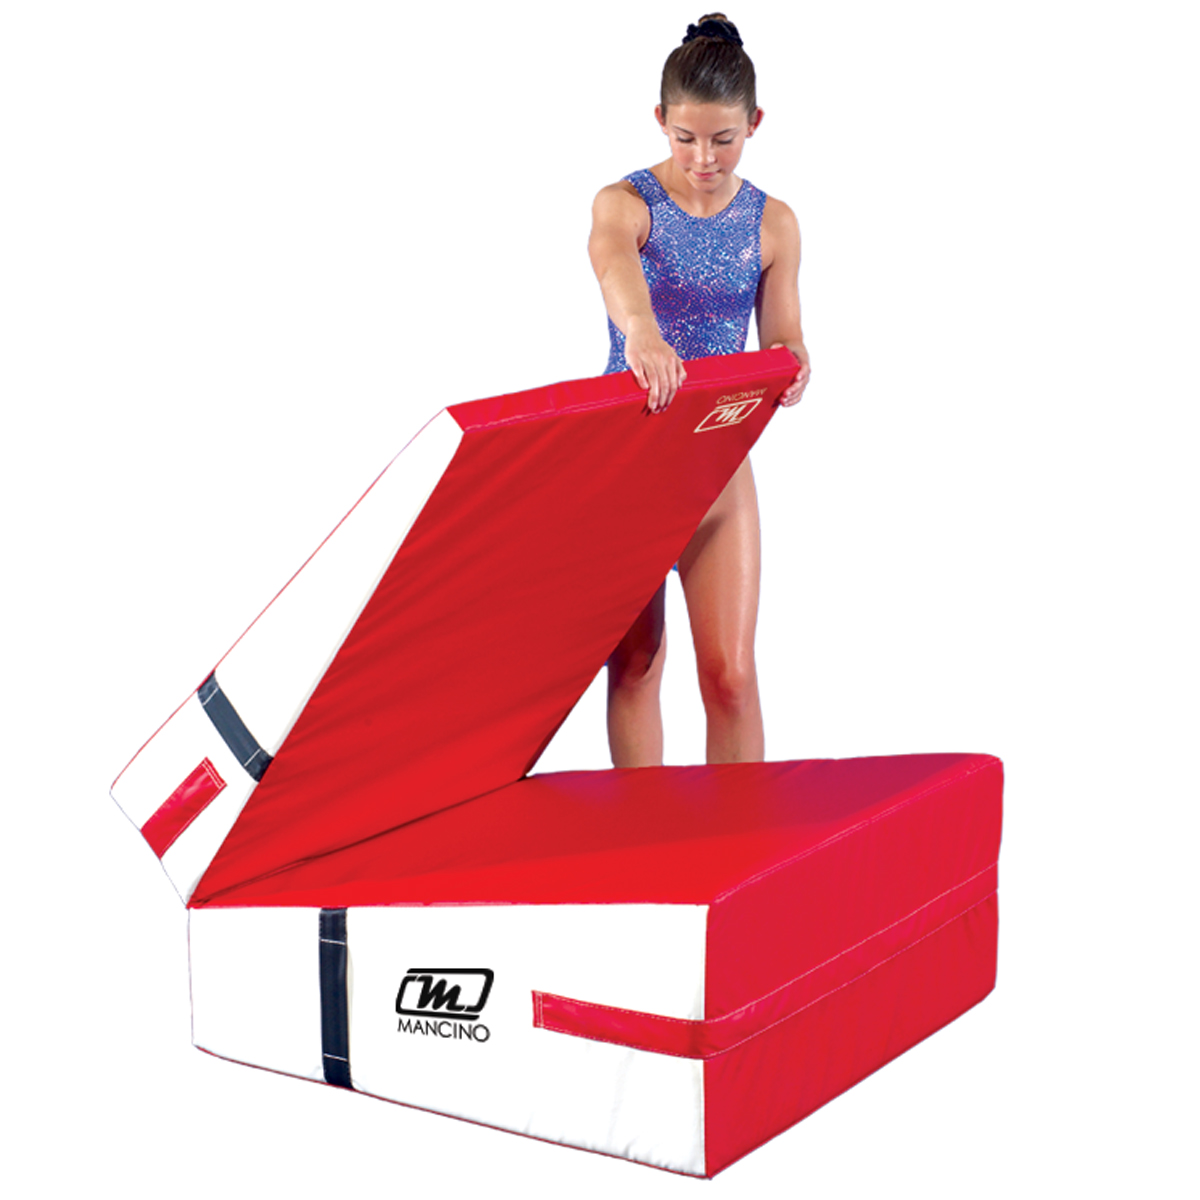 https://www.mancinomats.com/wp-content/uploads/2018/12/products-folding-incline-wedge-cheese-mat-gymnast1_1.jpg